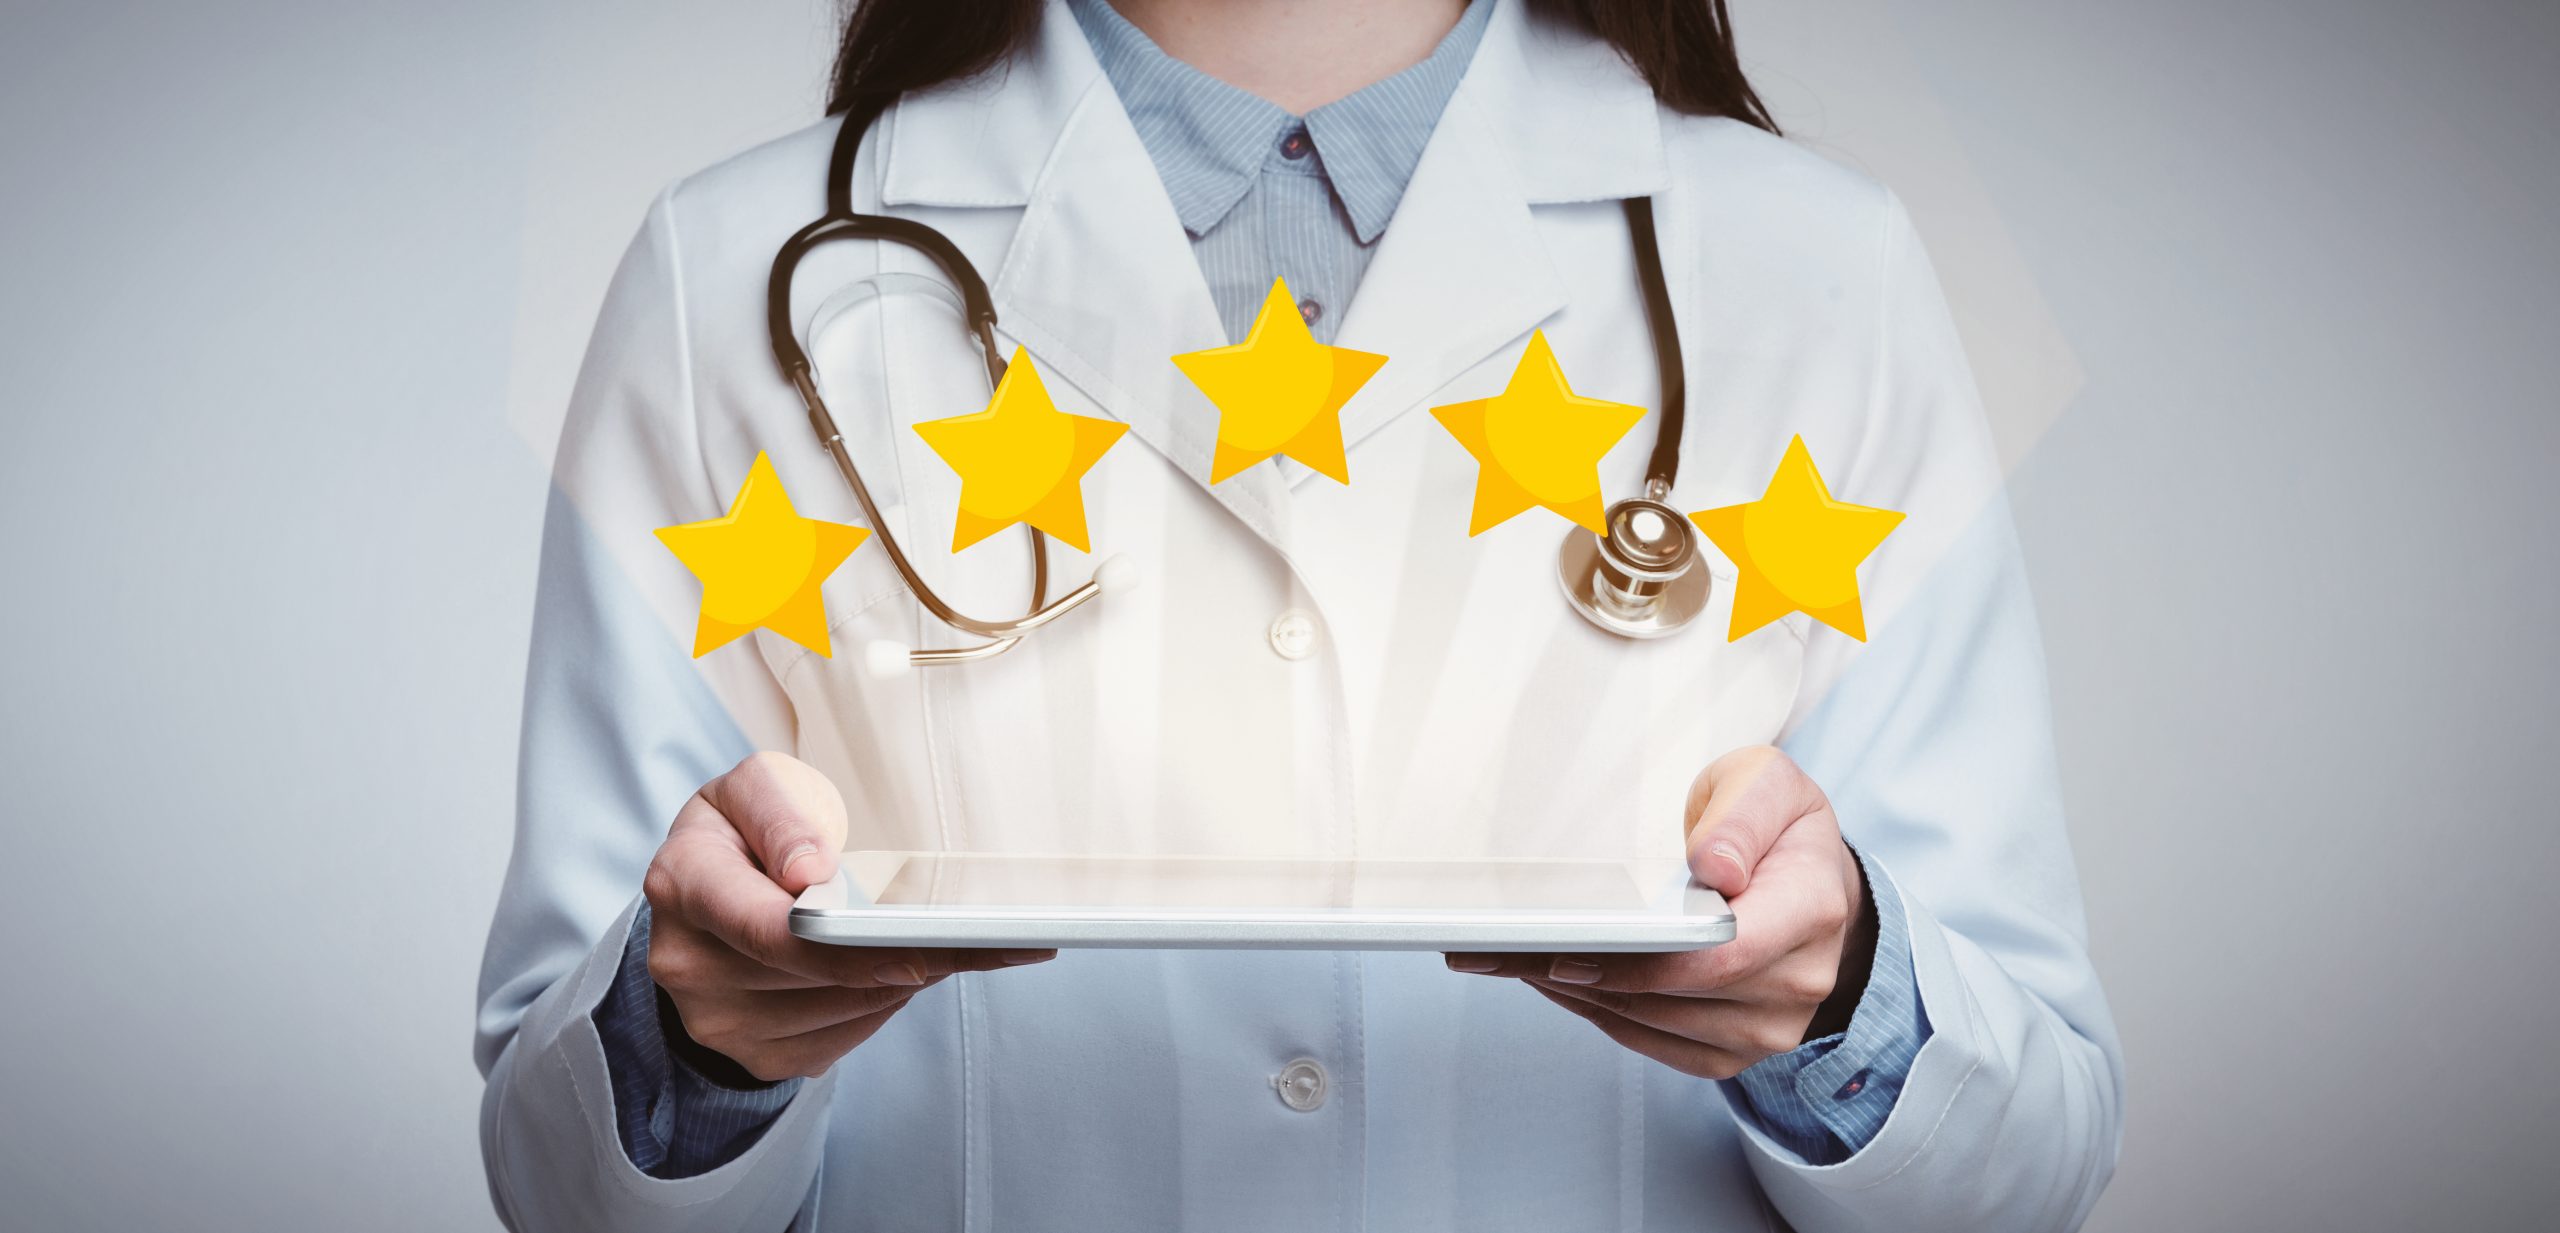 Unrecognizable Female Doctor Holding Digital Tablet With Five Stars Icons Above